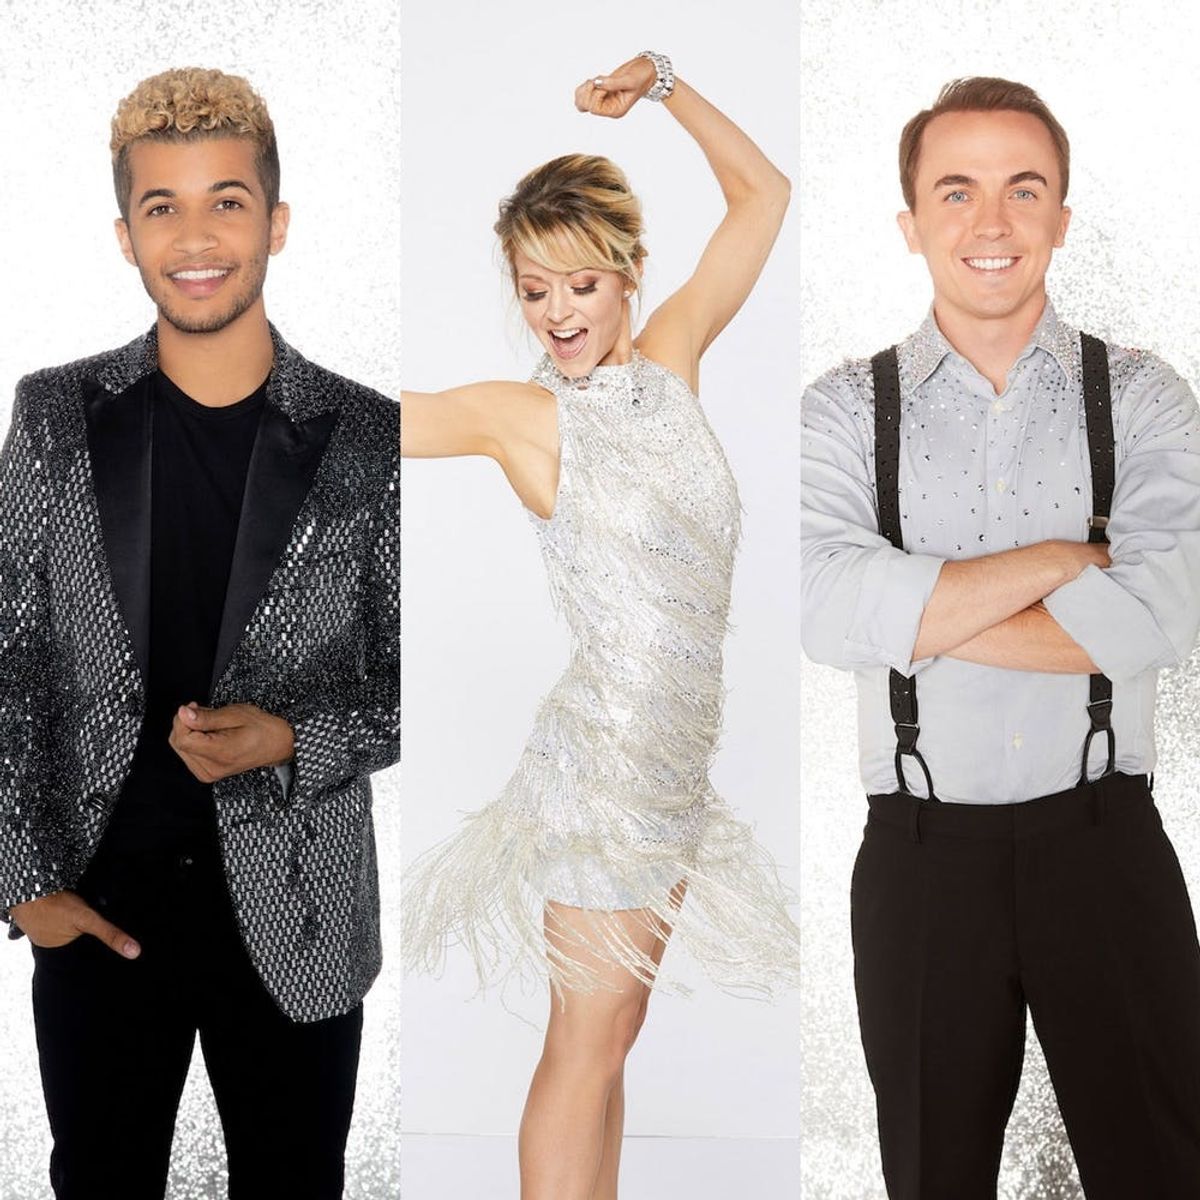 Who Won Season 25 of “Dancing With the Stars?”